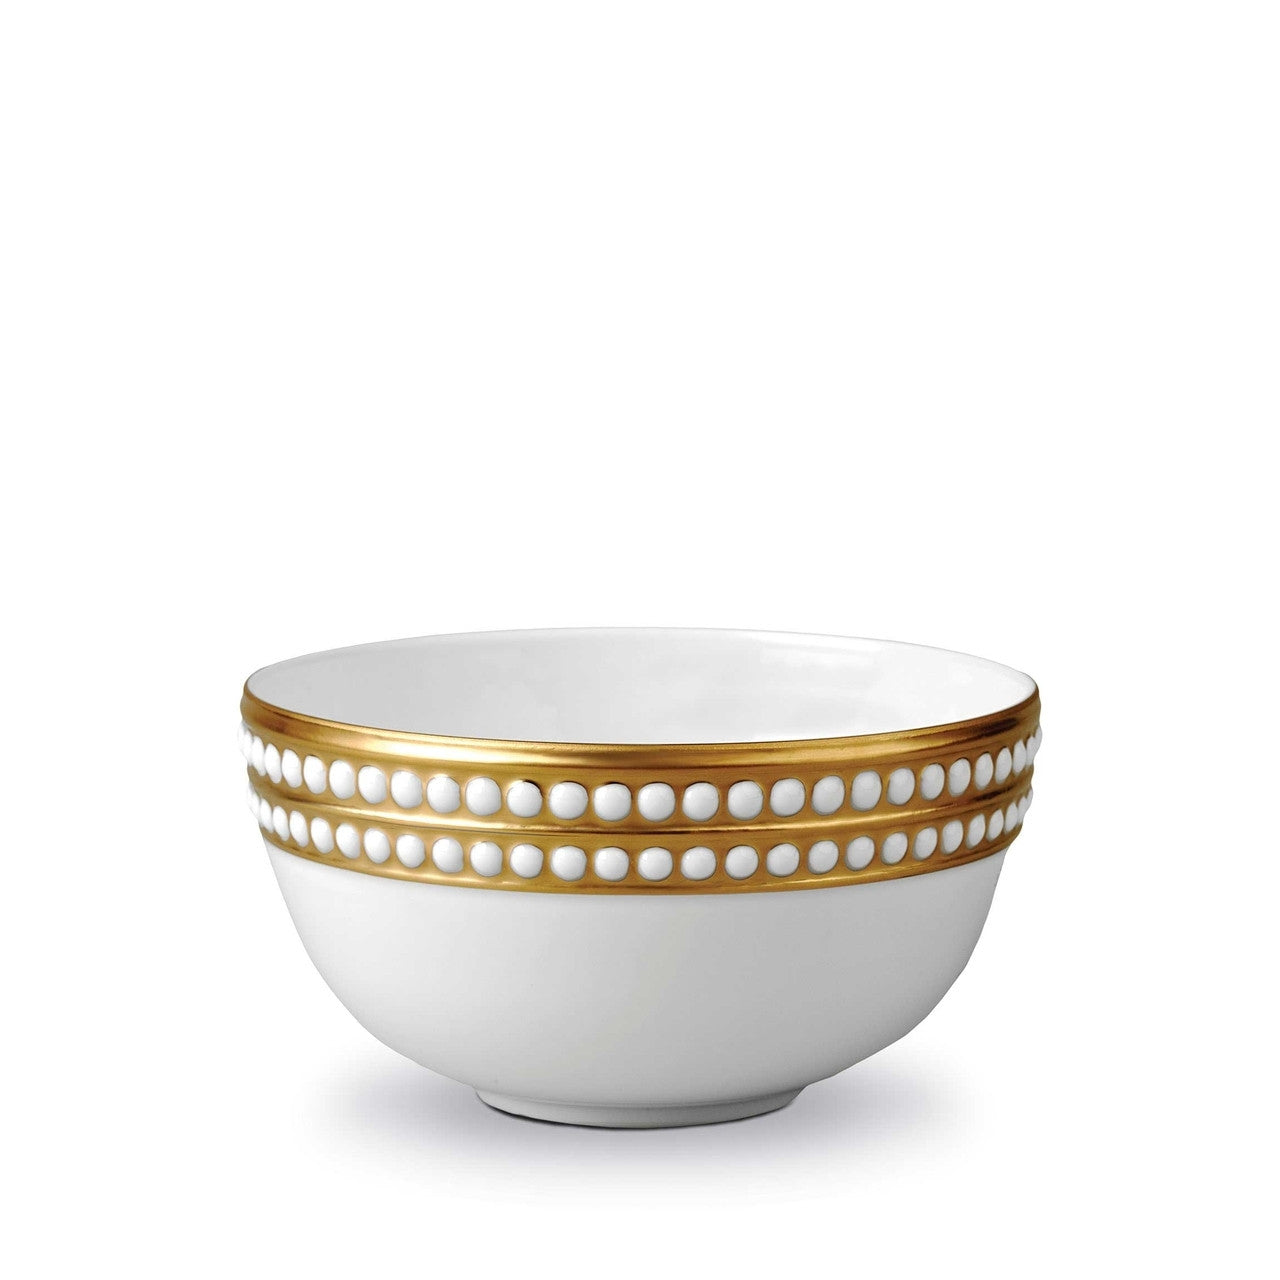 Perlee Gold Cereal Bowl - RSVP Style